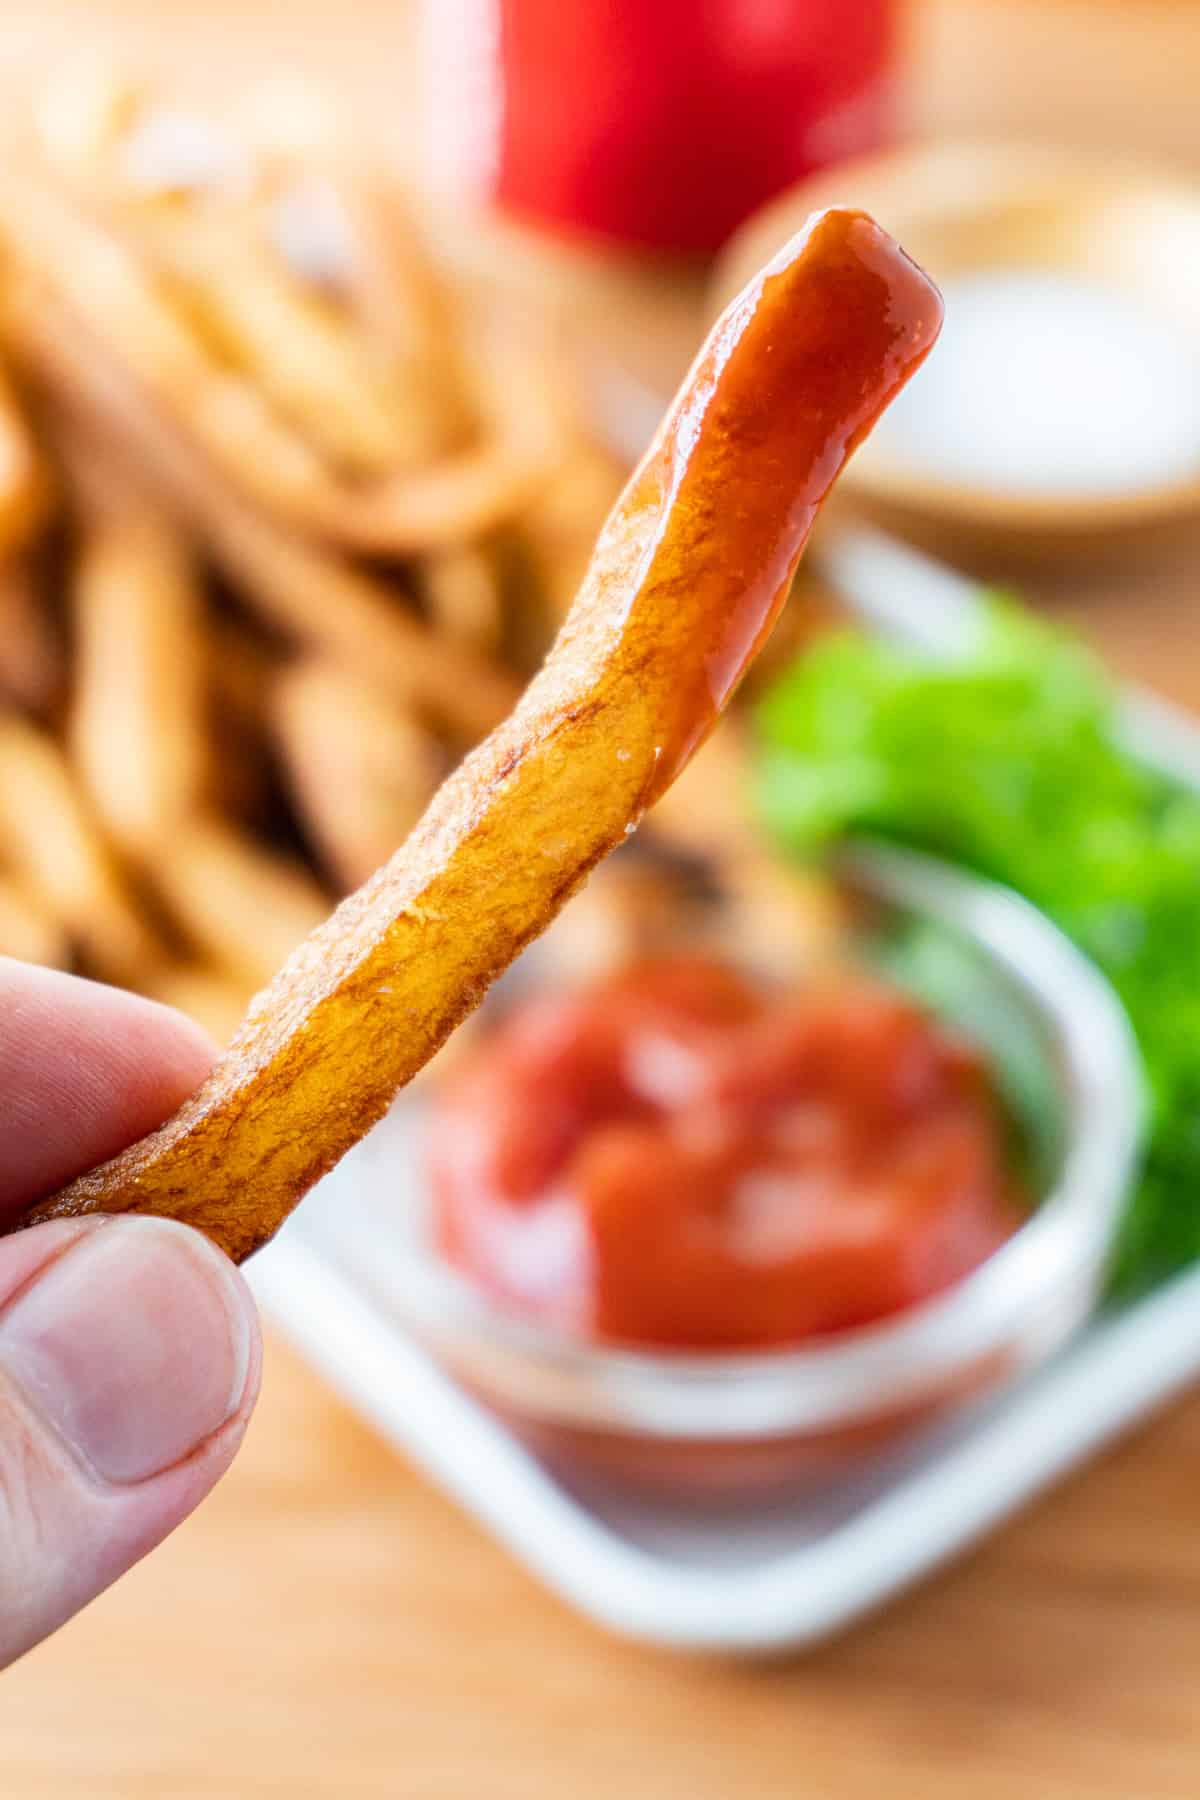 fried french fry dipped in ketchup